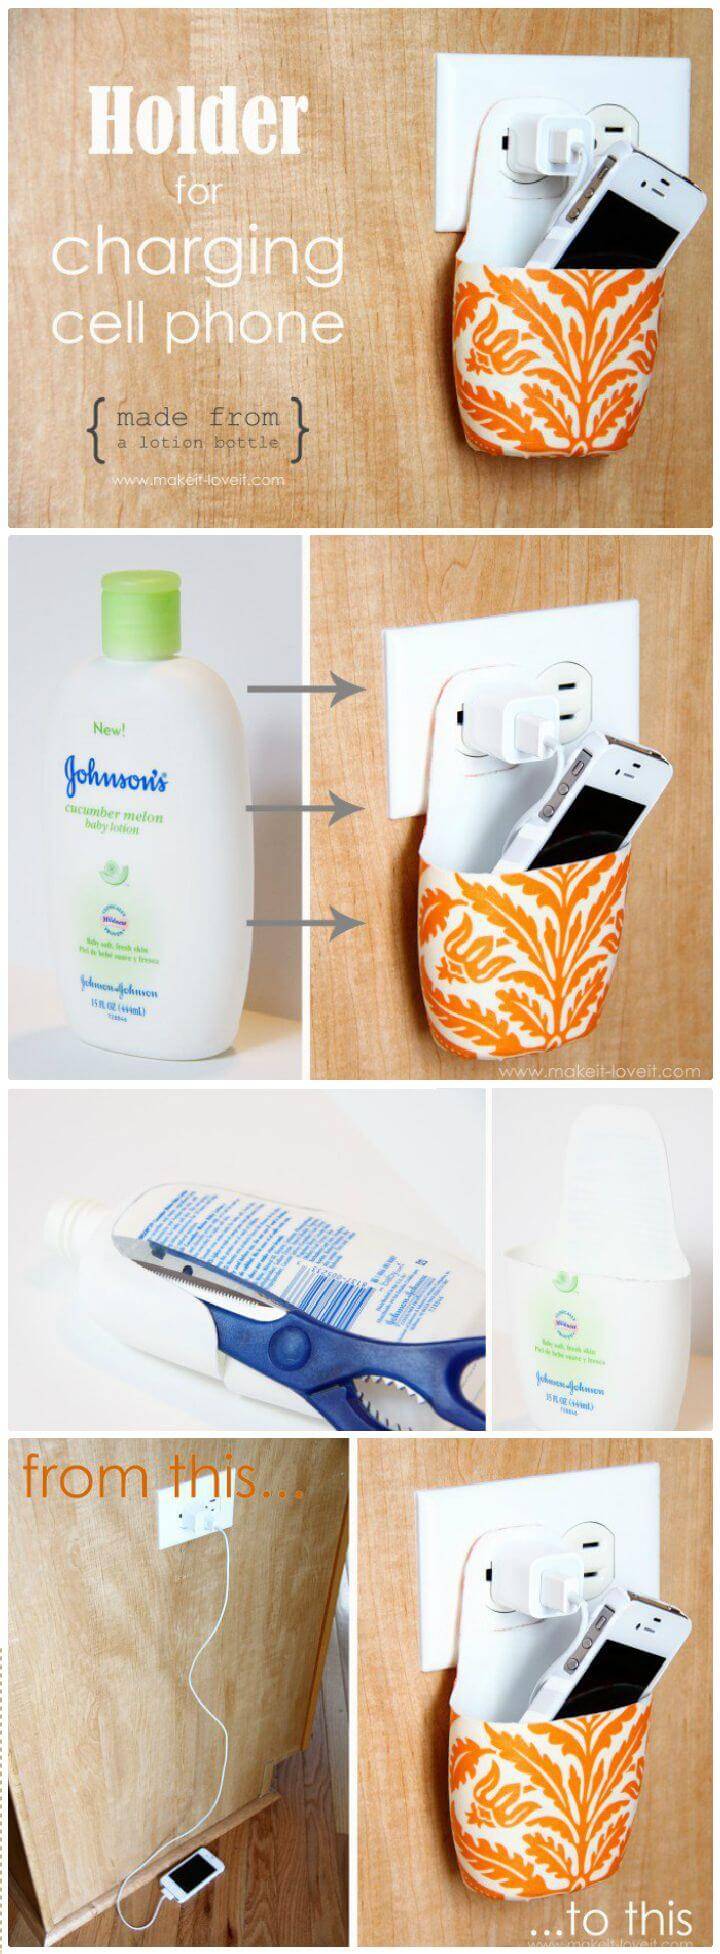 DIY Holder For Charging Cell Phone Made From Lotion Bottle